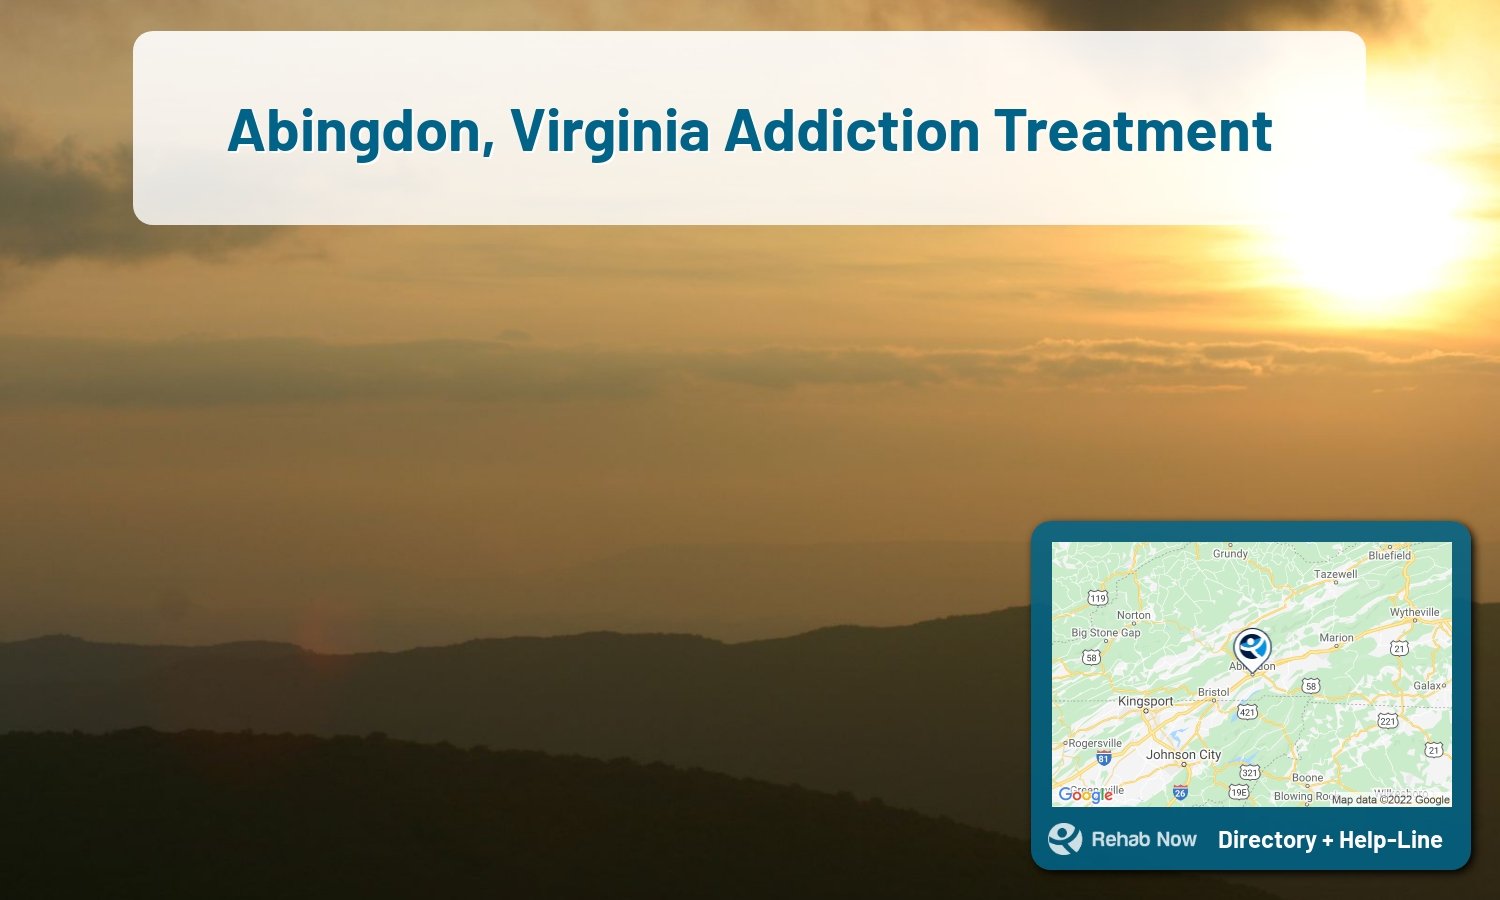 Drug rehab and alcohol treatment services nearby Abingdon, VA. Need help choosing a treatment program? Call our free hotline!